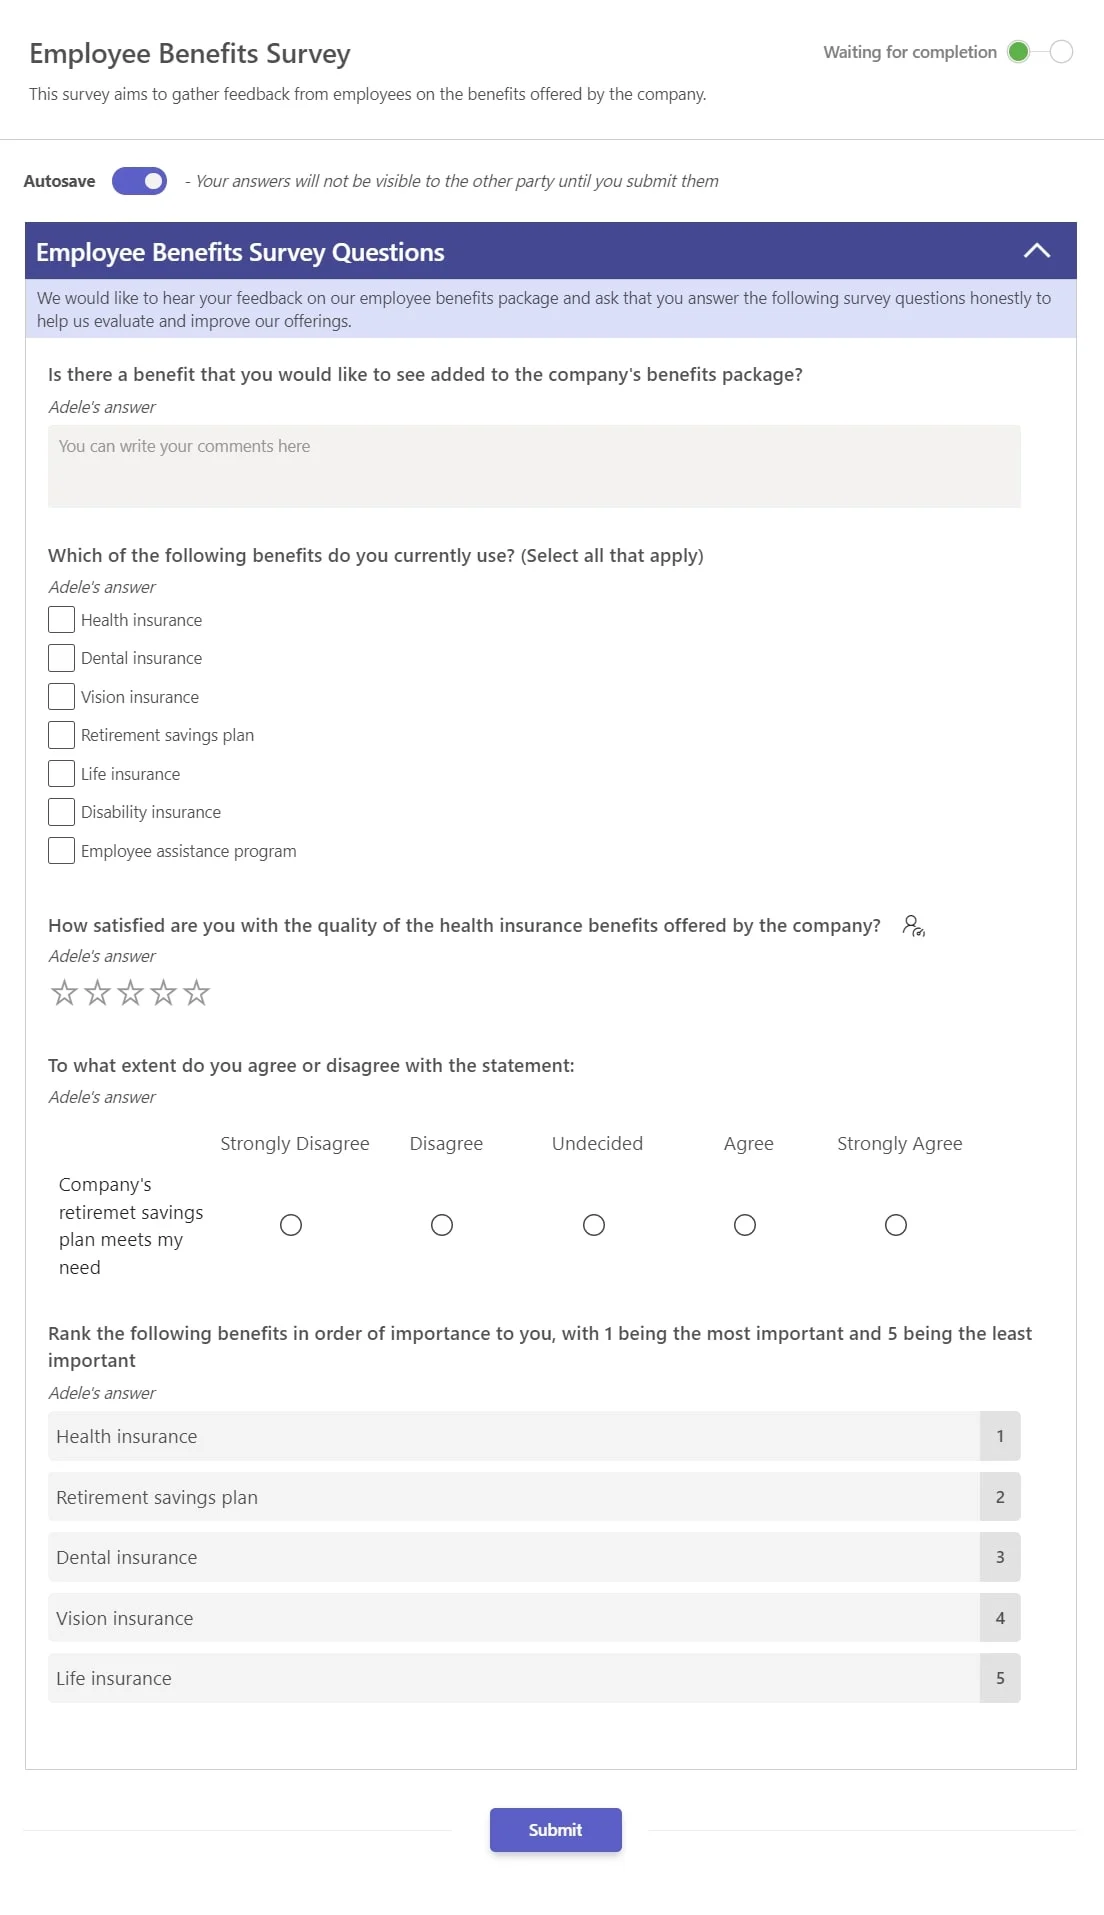 teamflect employee benefits survey template with questions